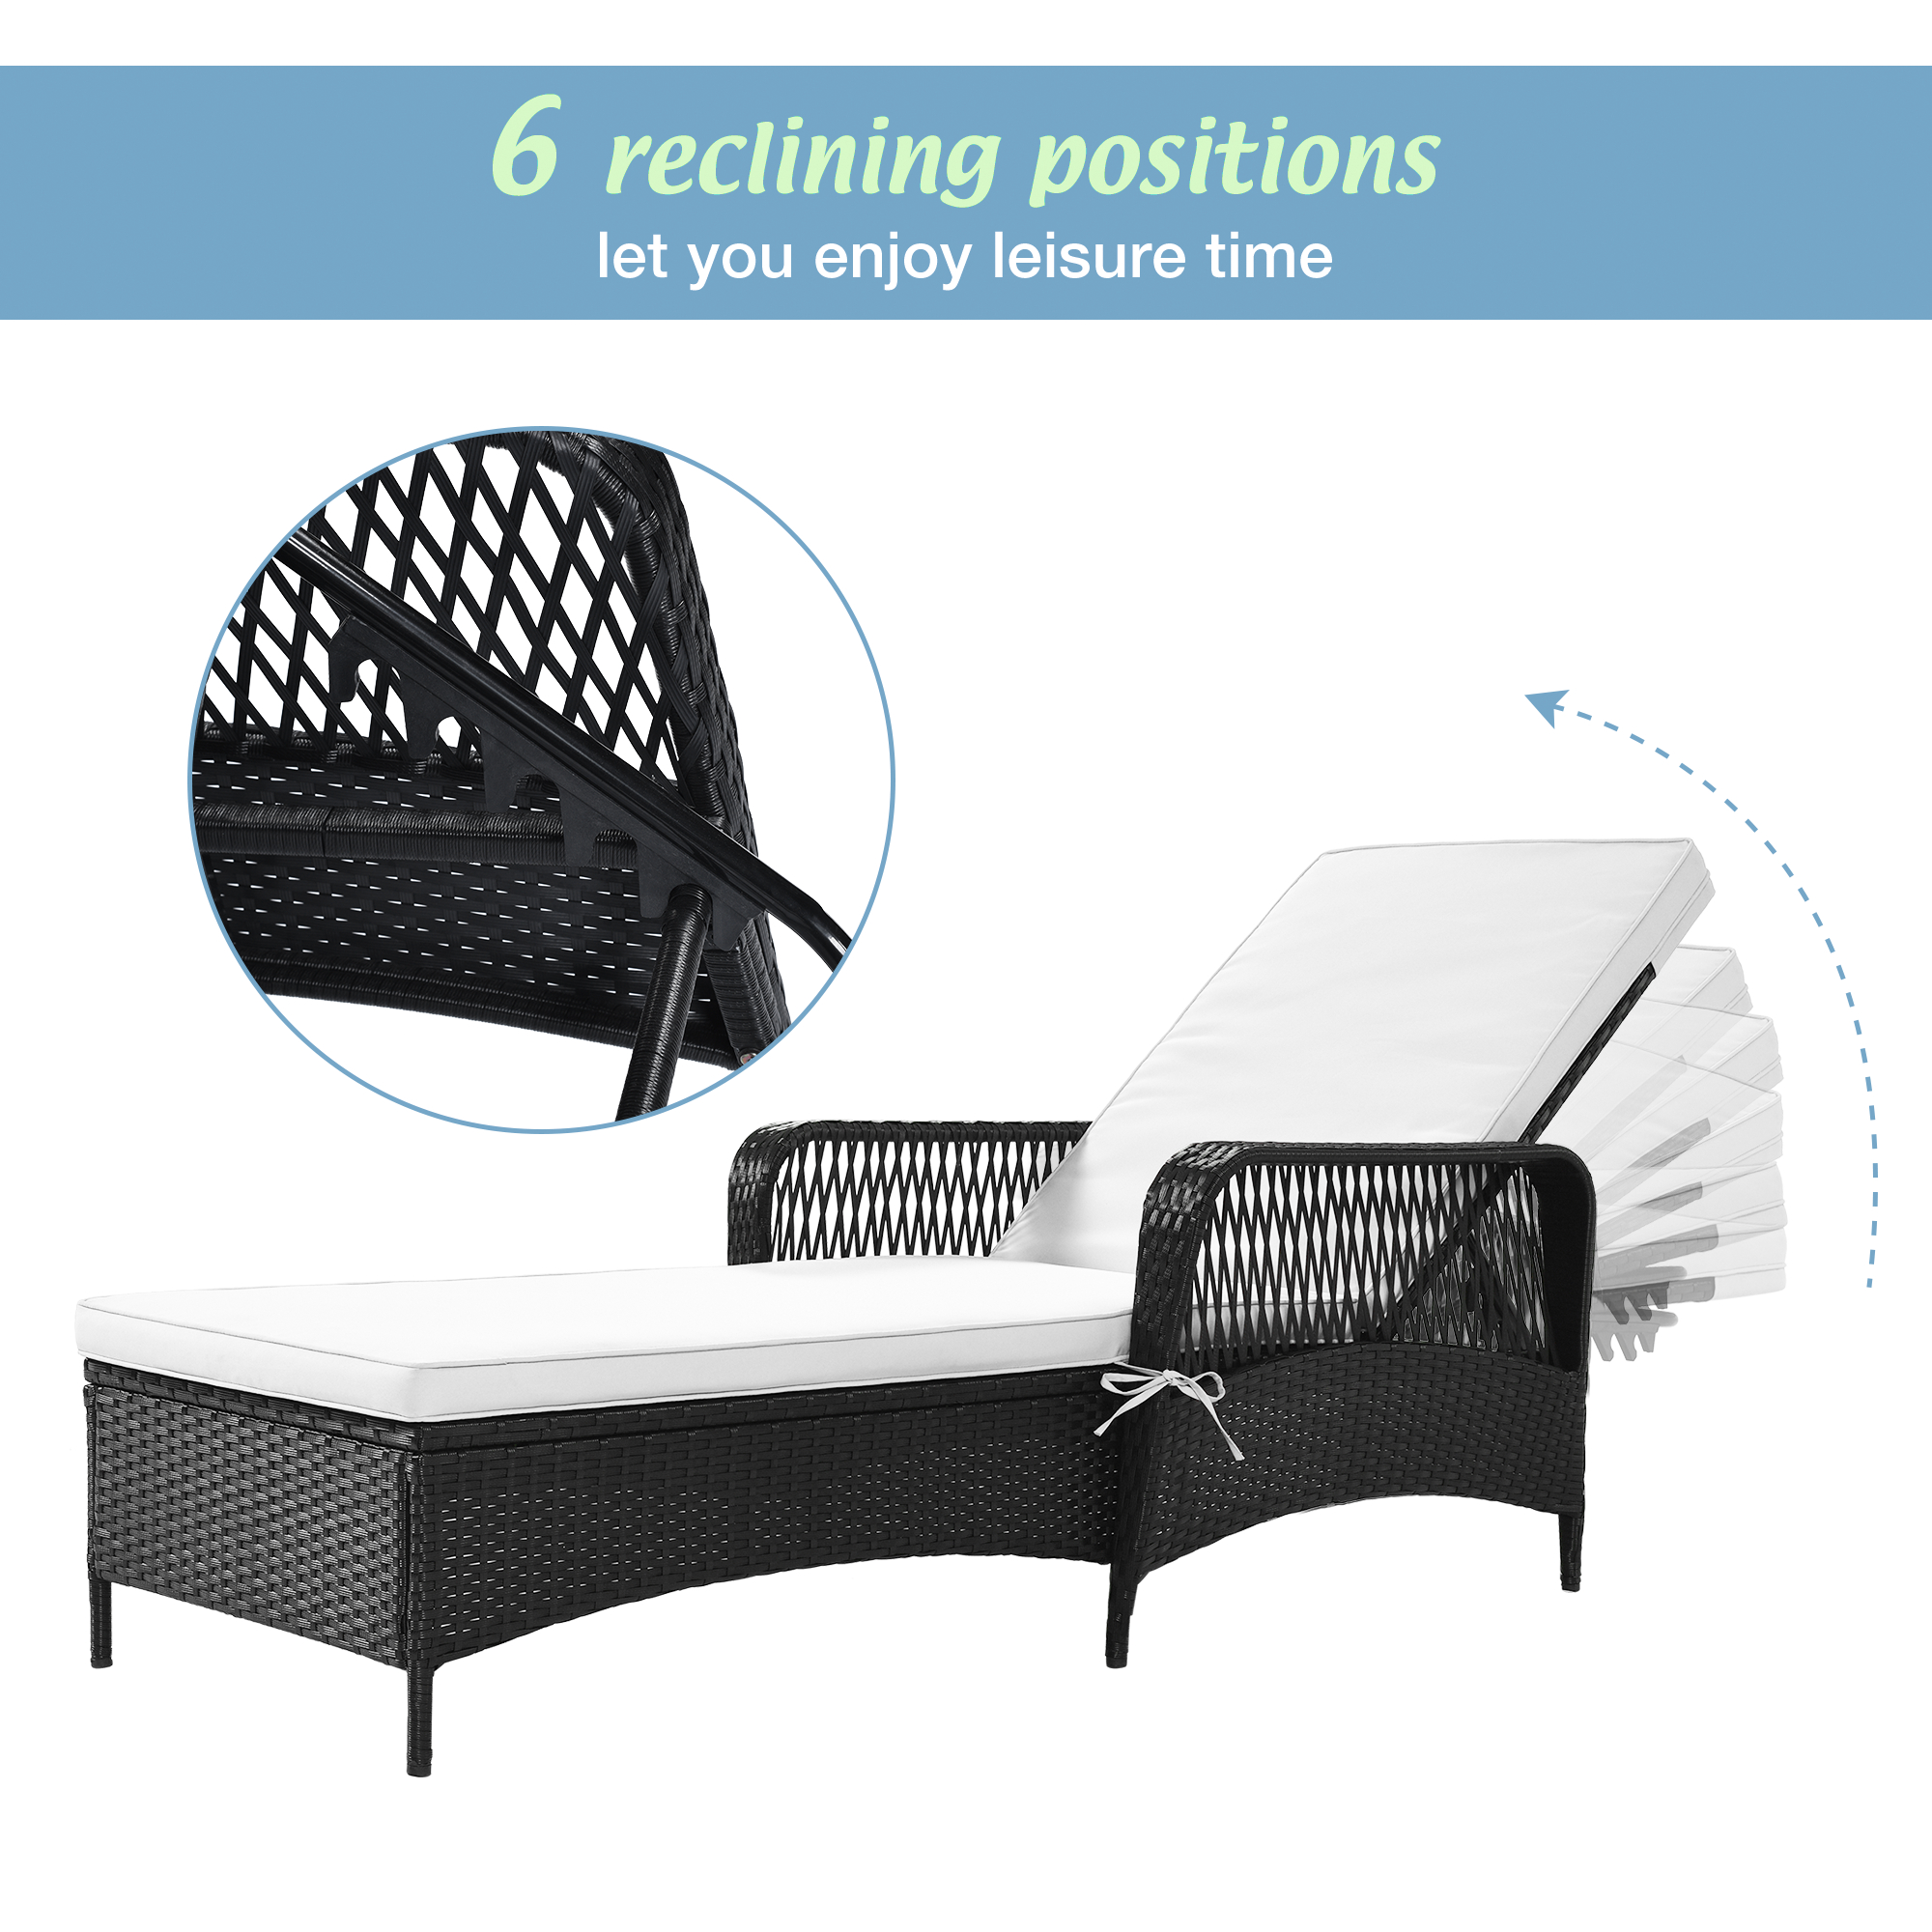 2PCS Chaise Lounges for Beach, Aukfa Adjustable Patio Chaise Lounge Chair, Outdoor Rattan Lounge Chair with Armrest and Cushion, Patio Furniture Recliner for Deck, Poolside, Backyard - image 5 of 11